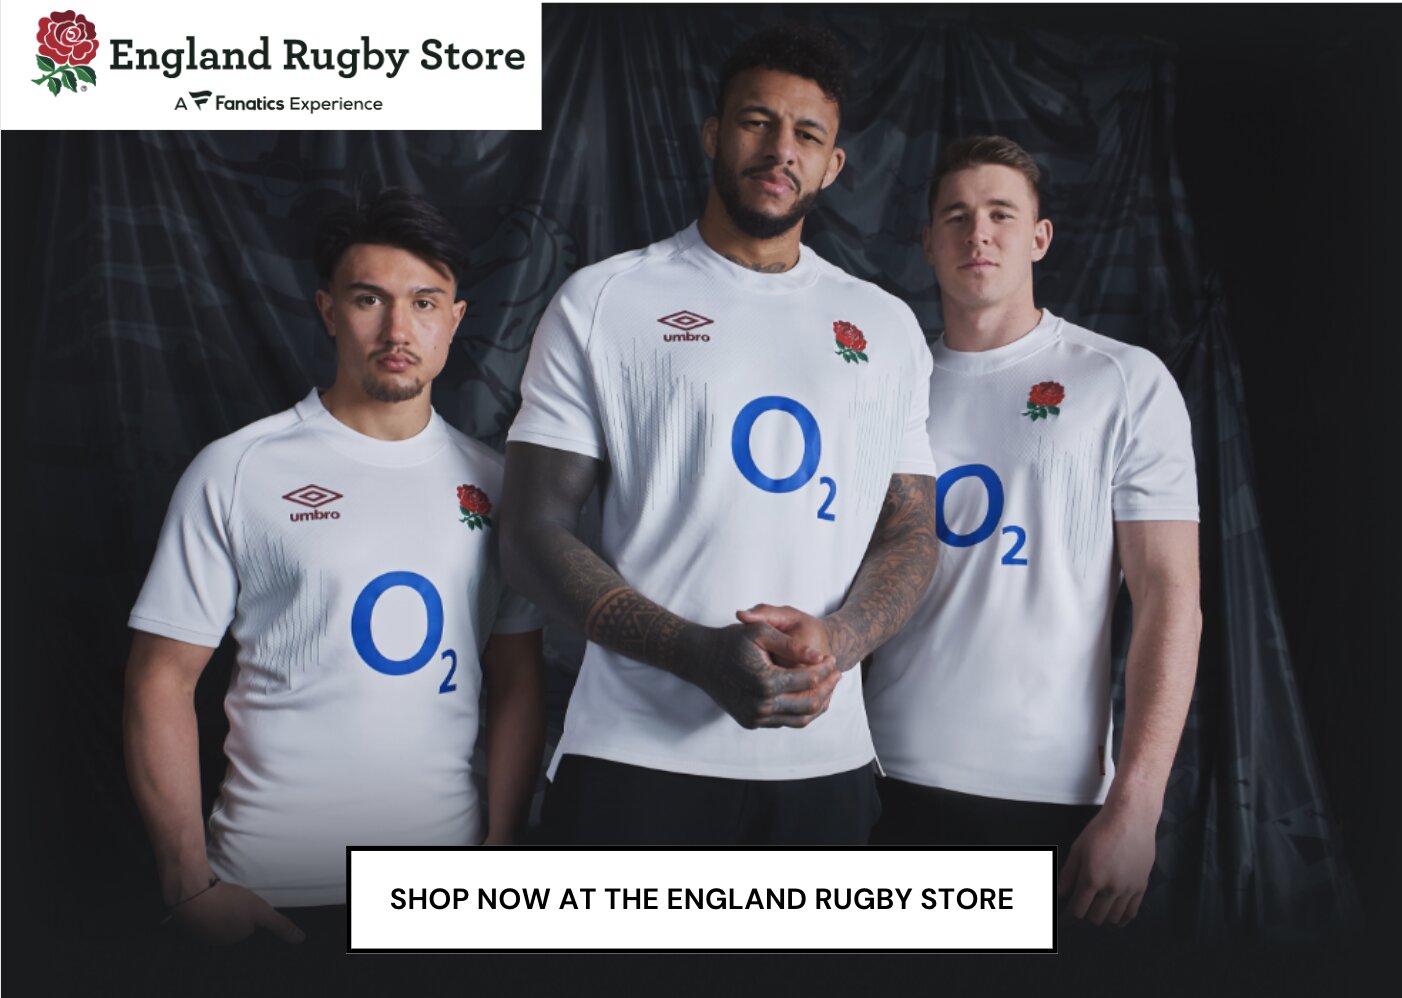 England rugby store mpu